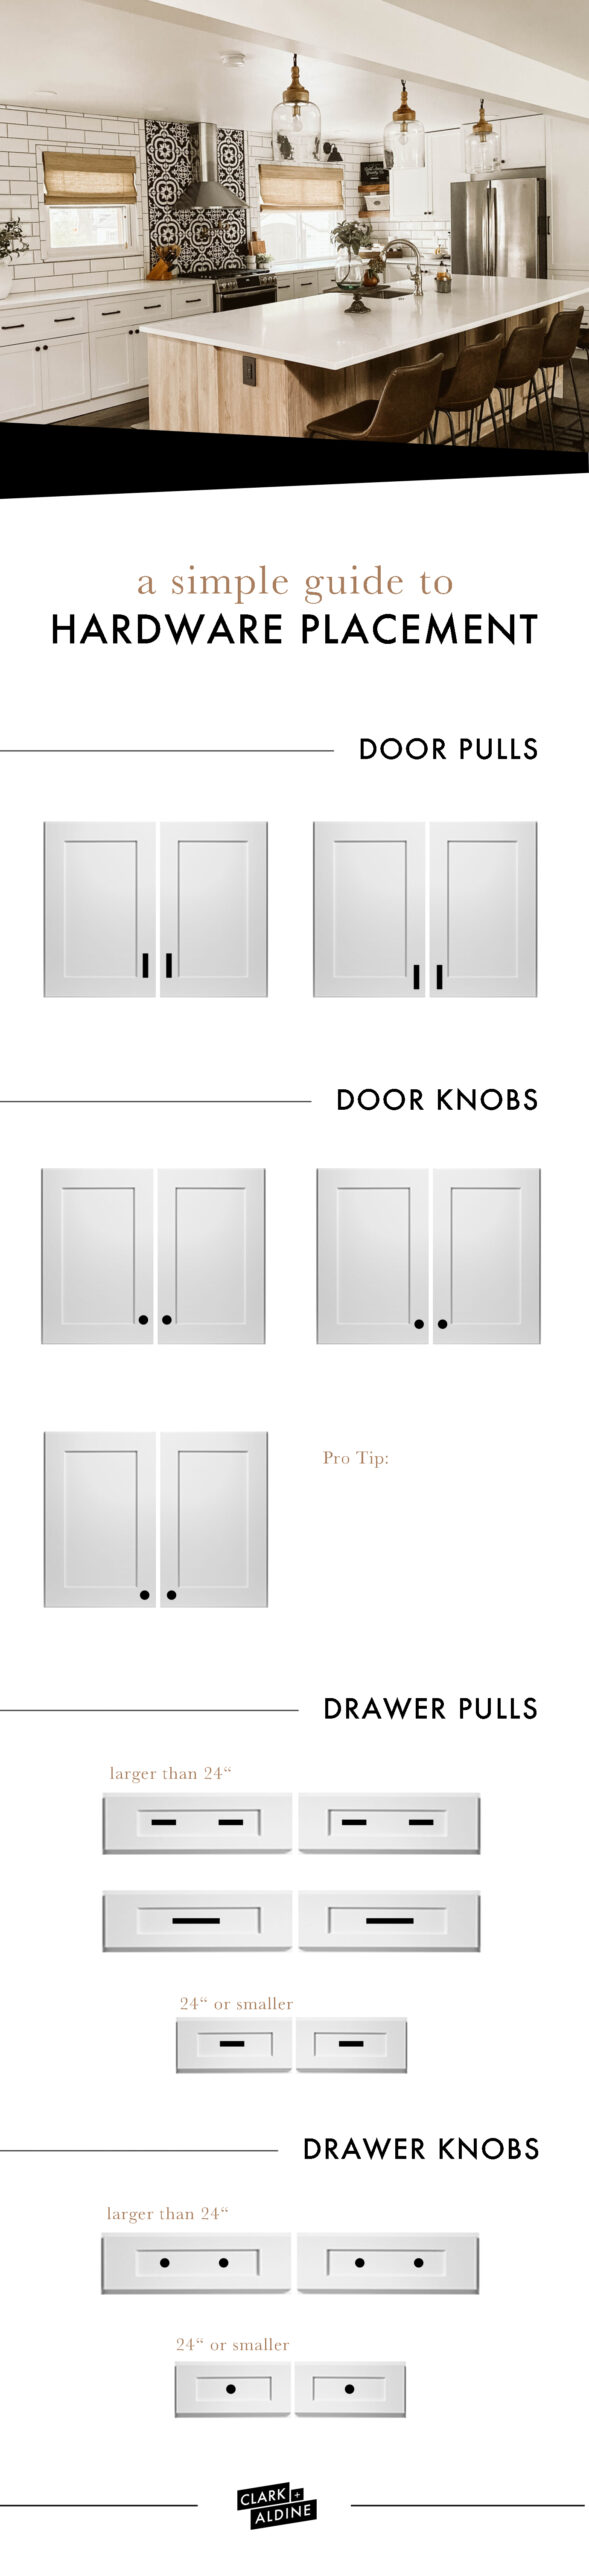 CABINET HARDWARE PLACEMENT GUIDE image 1